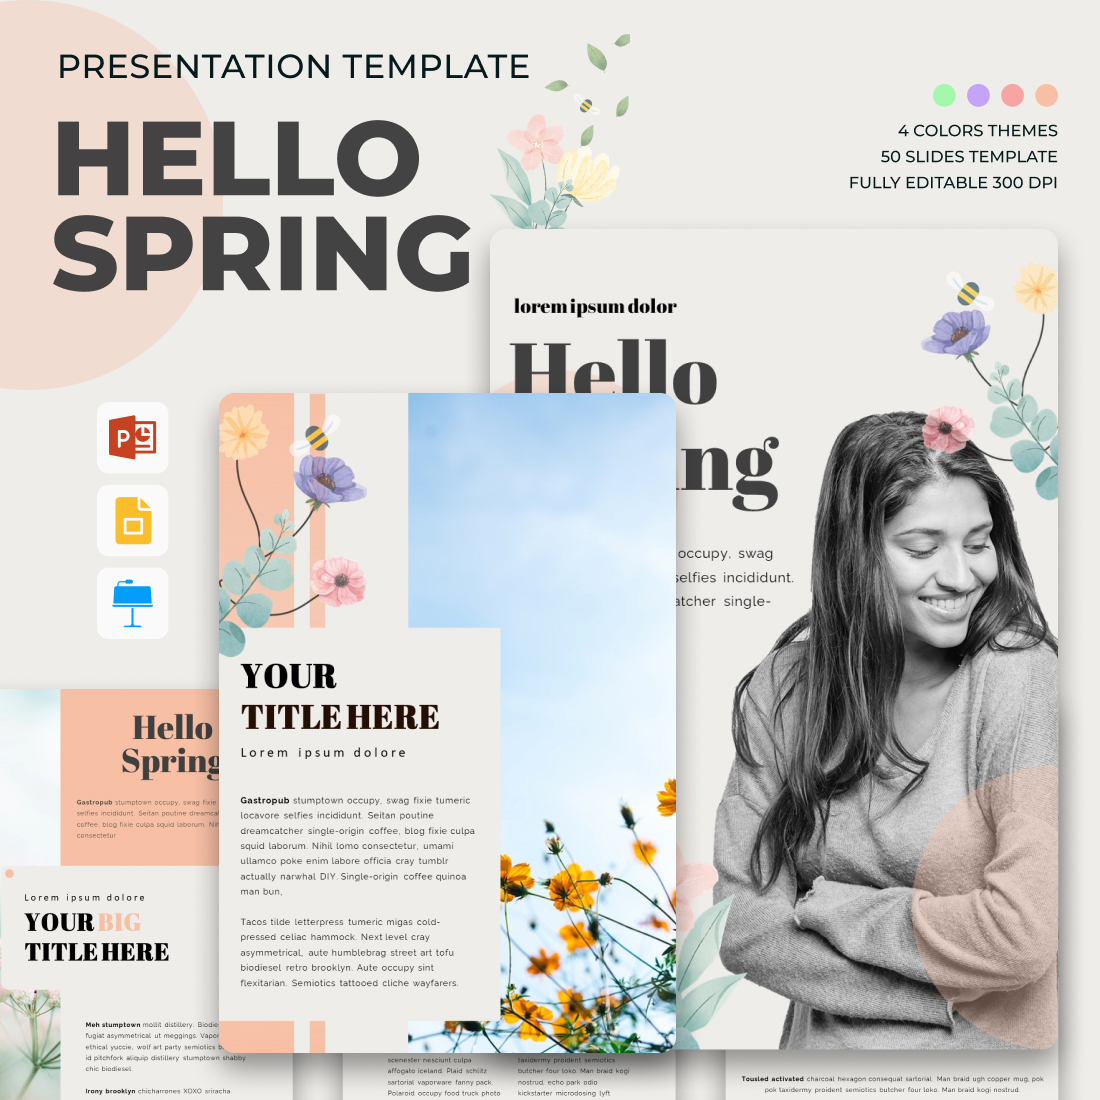 A set of images of gorgeous presentation slides on the theme of the coming of spring.